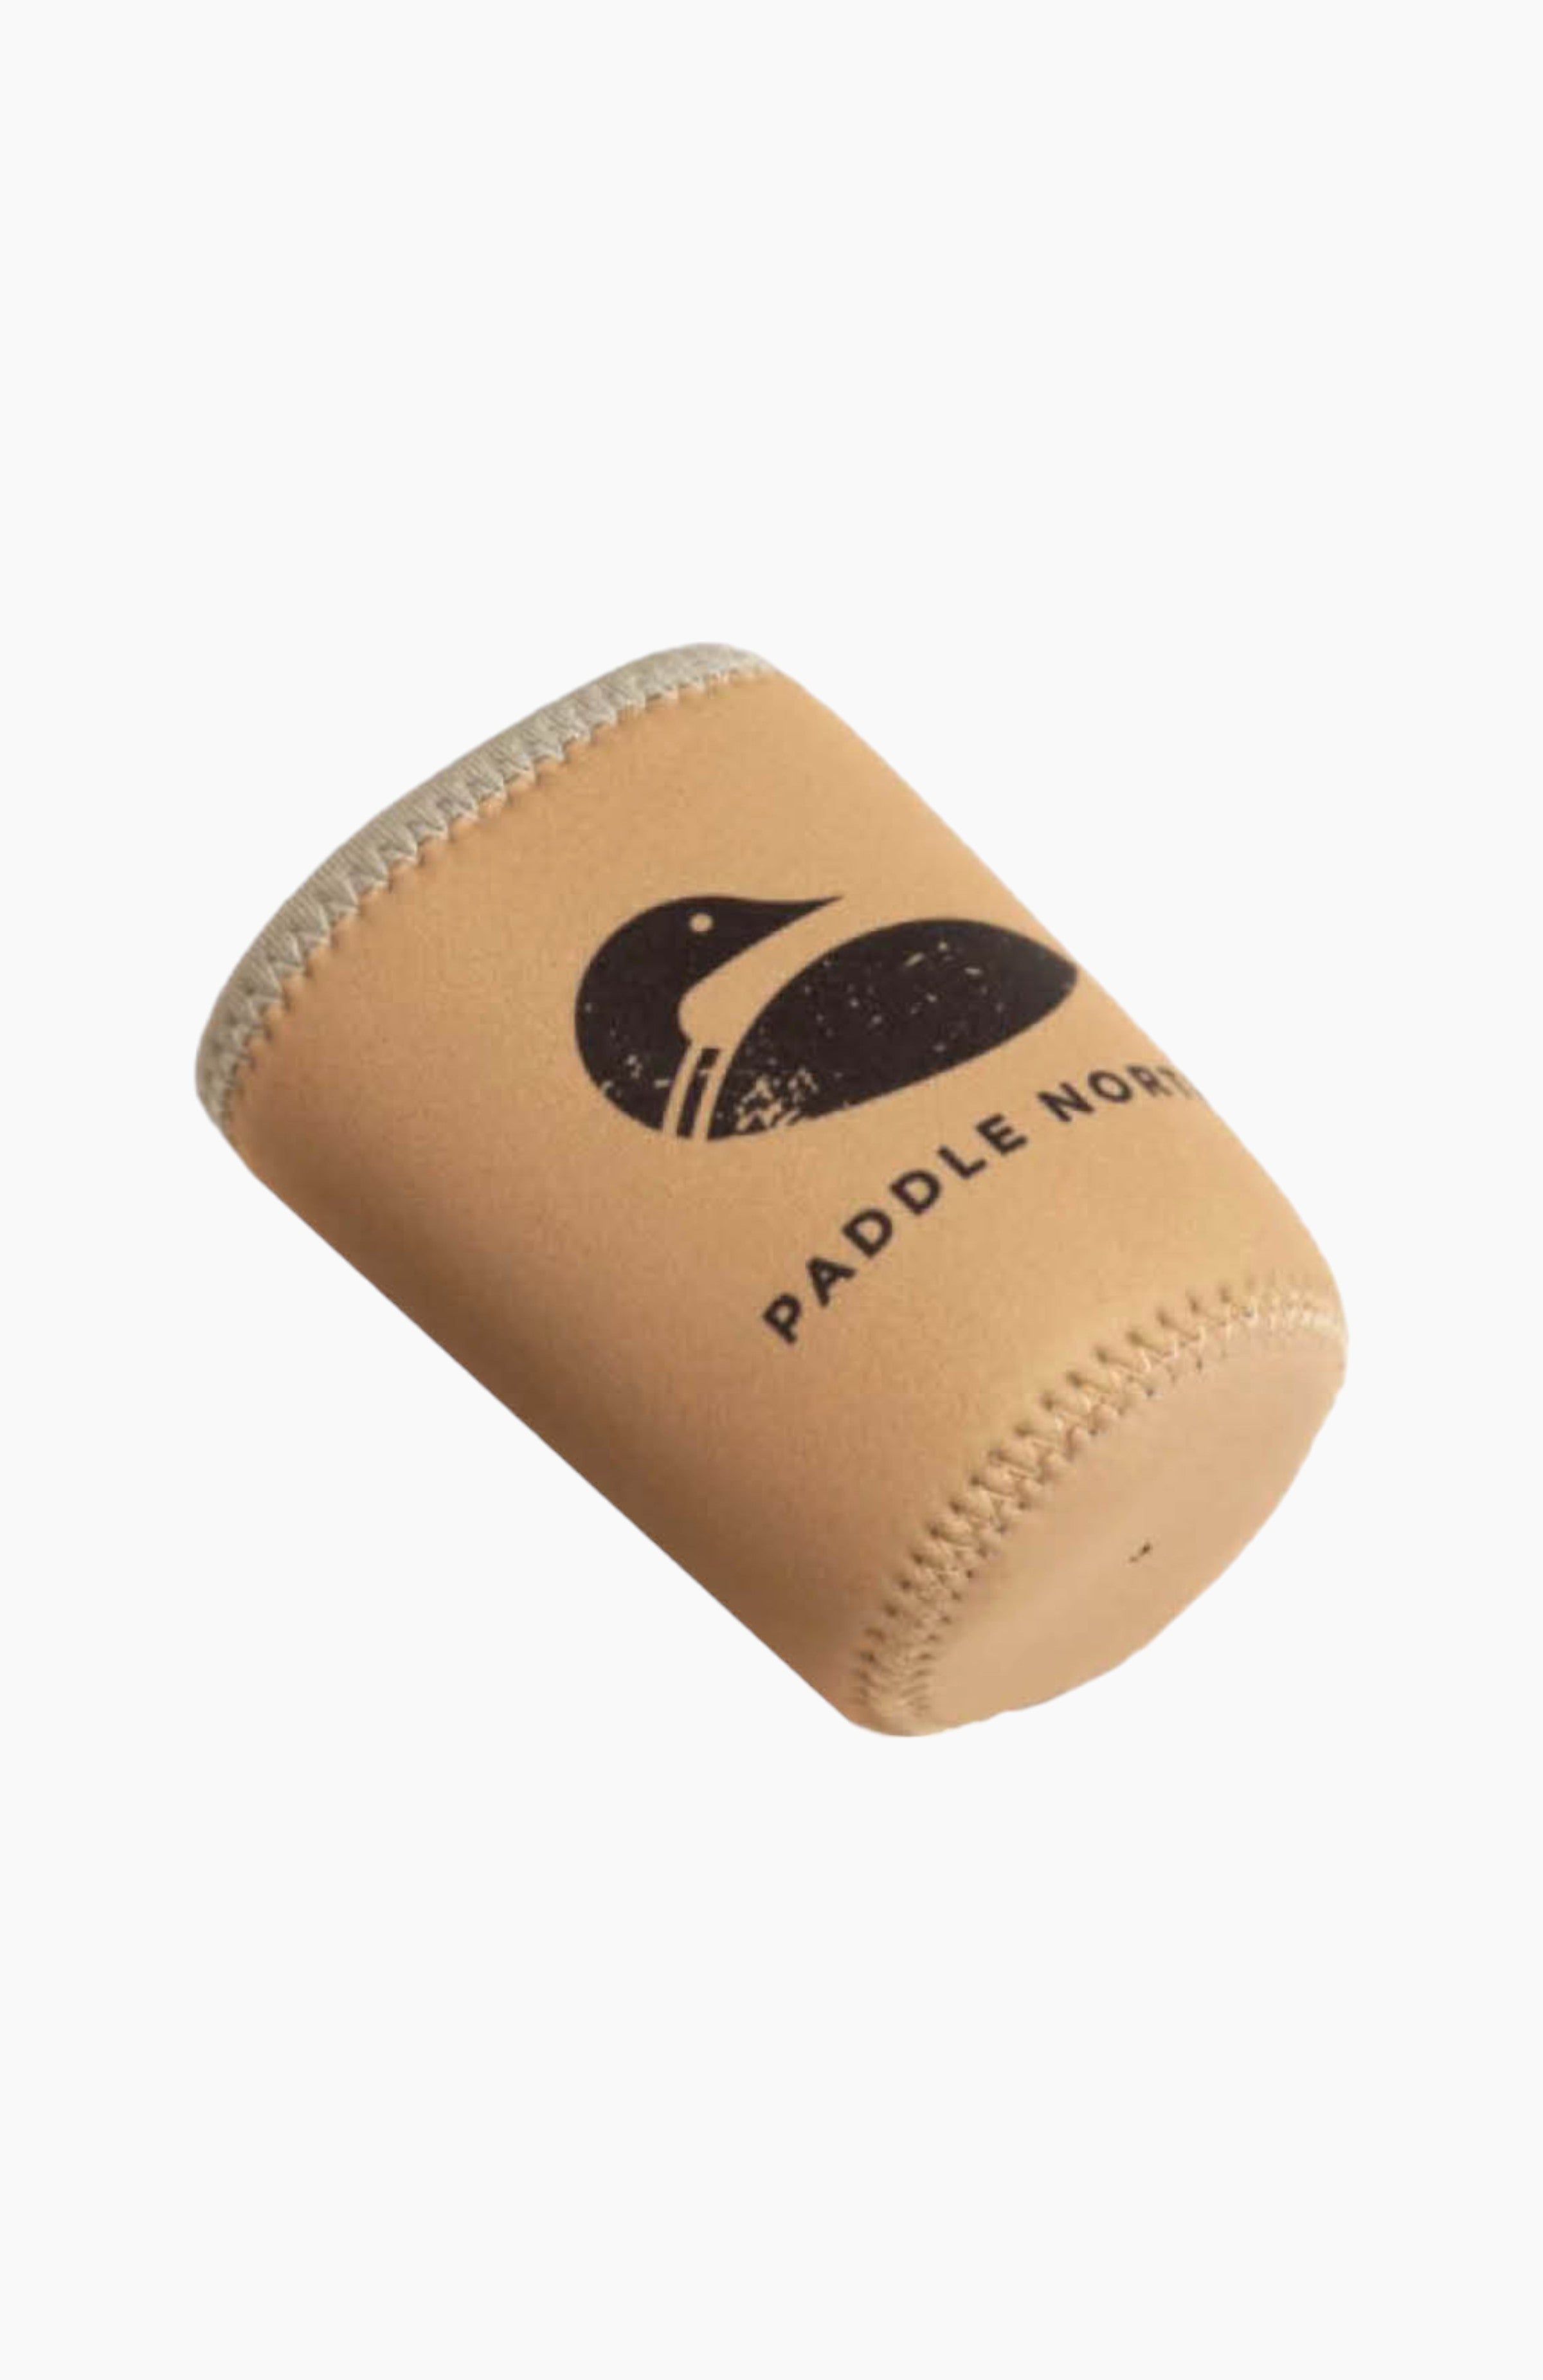 A tan can koozie with grey seam with the paddle north logo printed on one side.